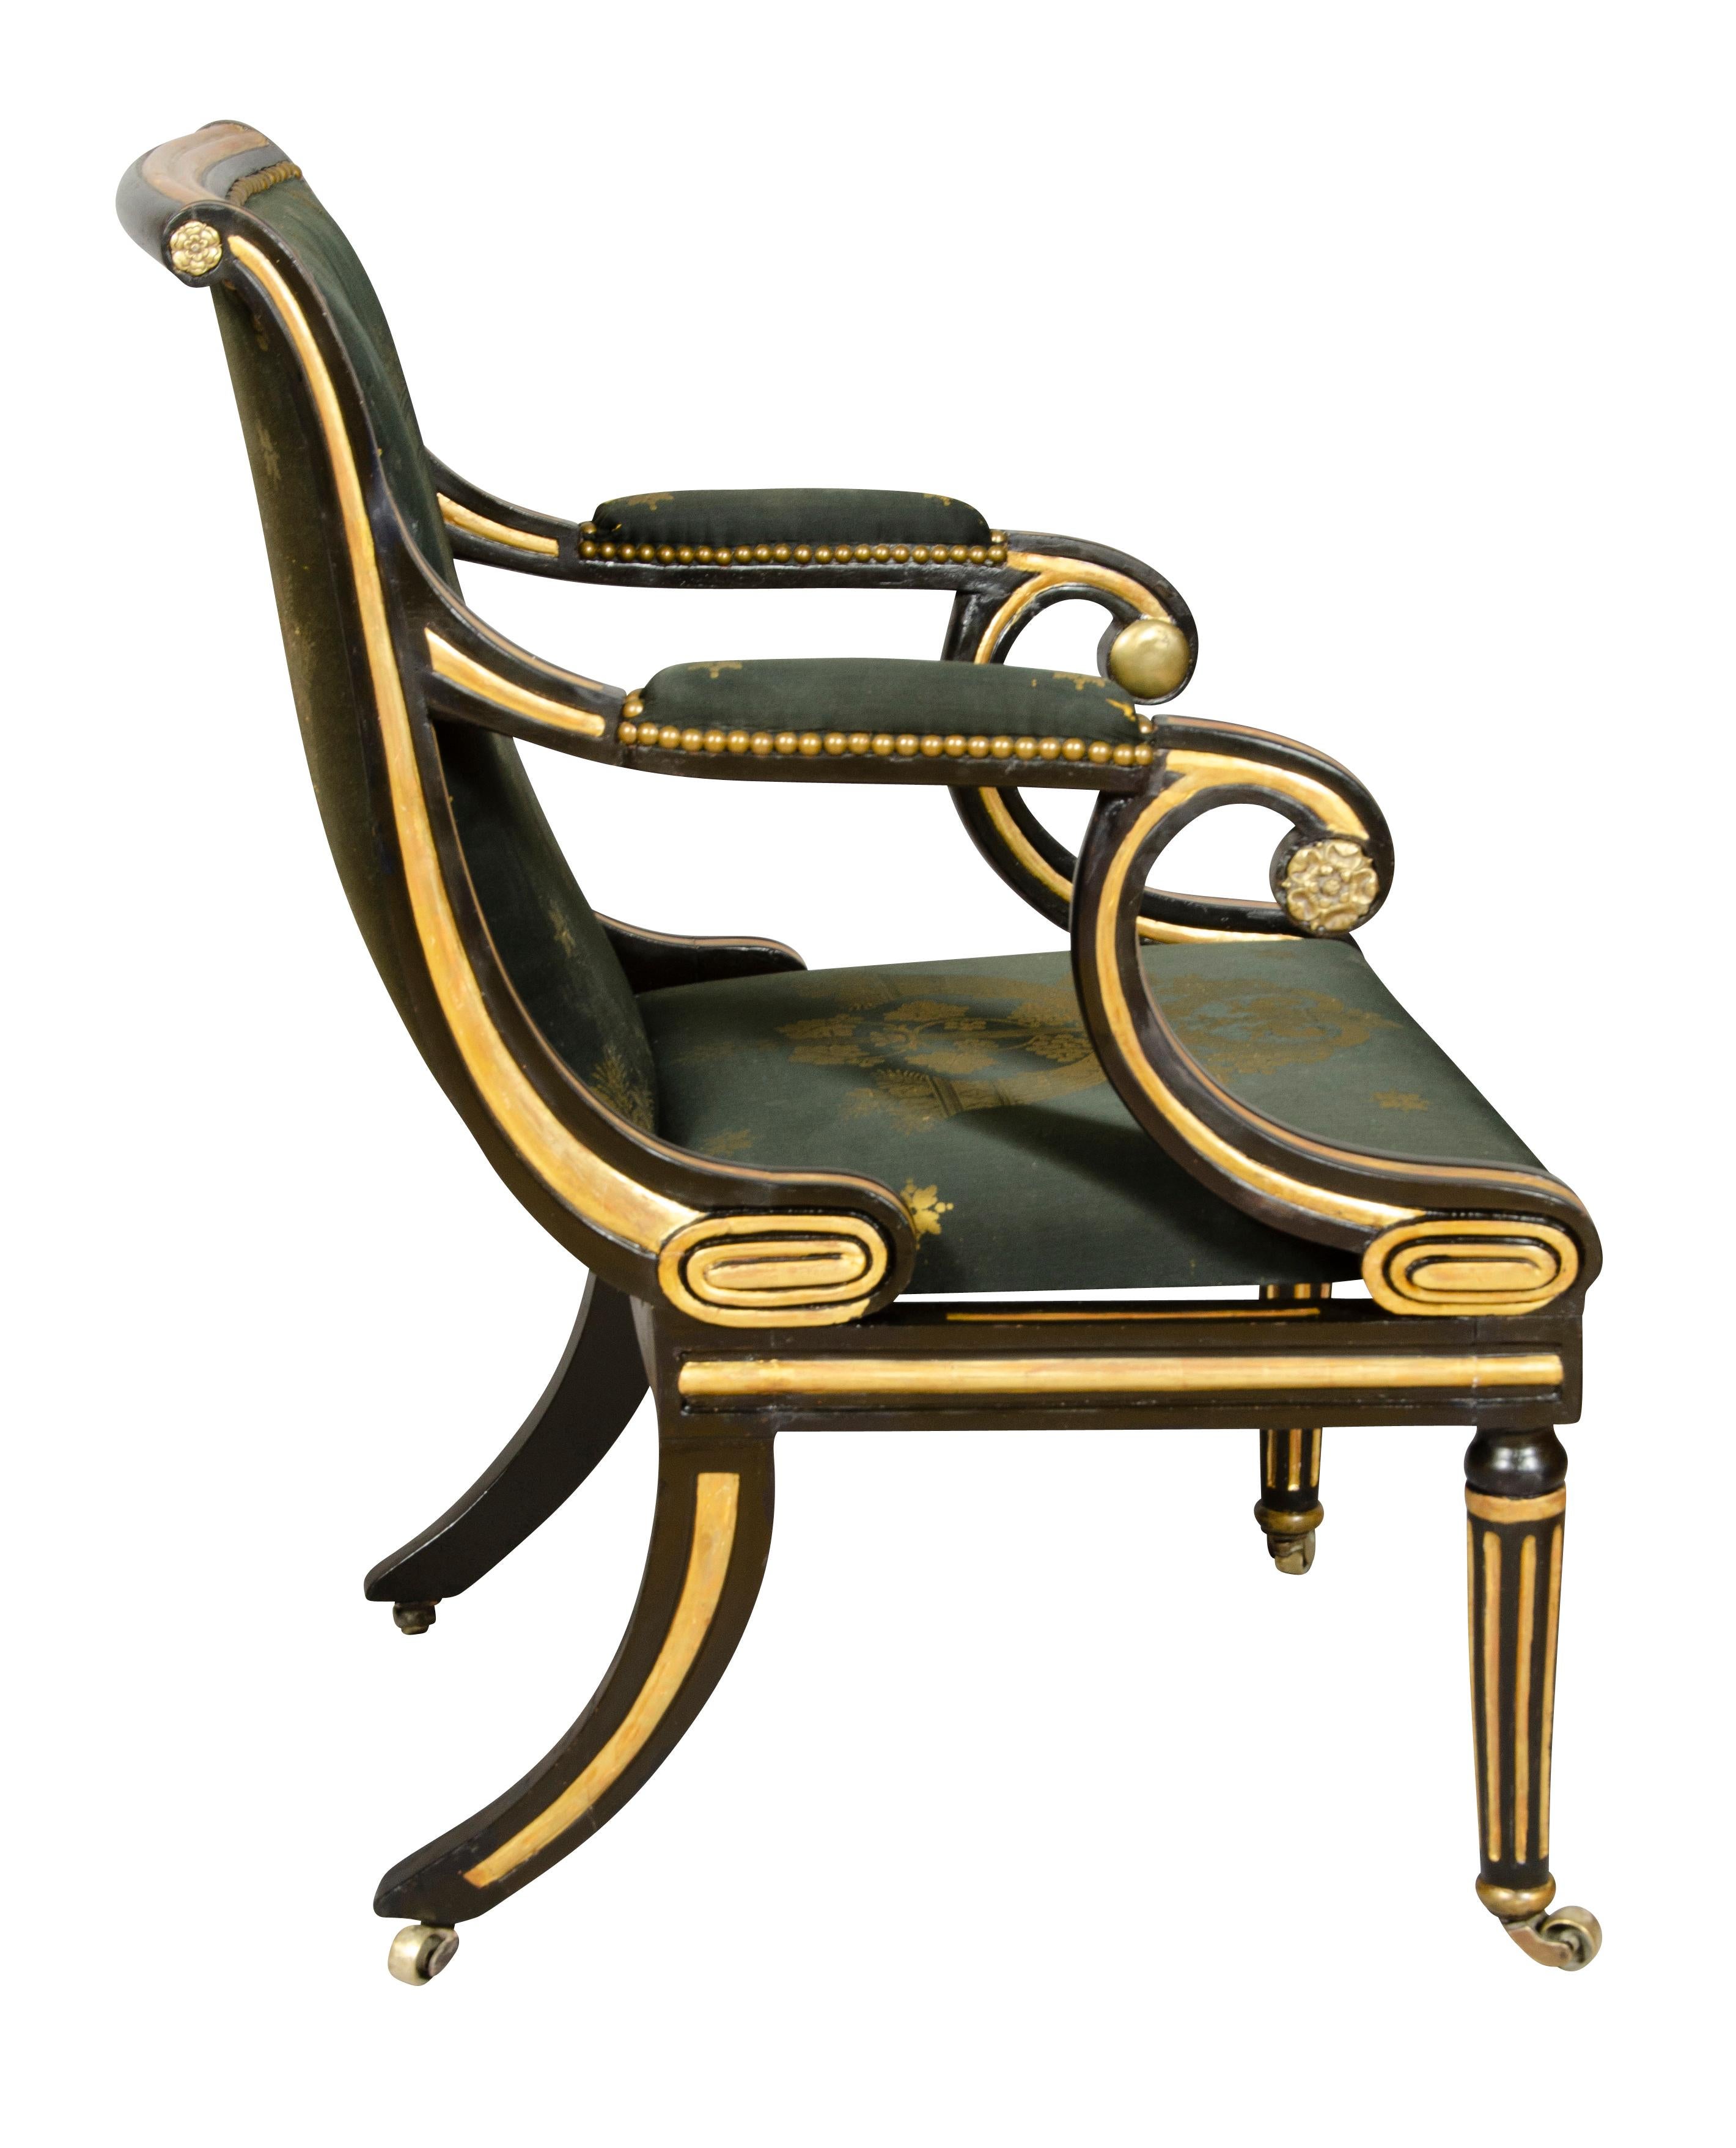 With a scrolled crestrail and upholstered back and seat, scrolled arms and circular tapered legs with fluting. Casters.